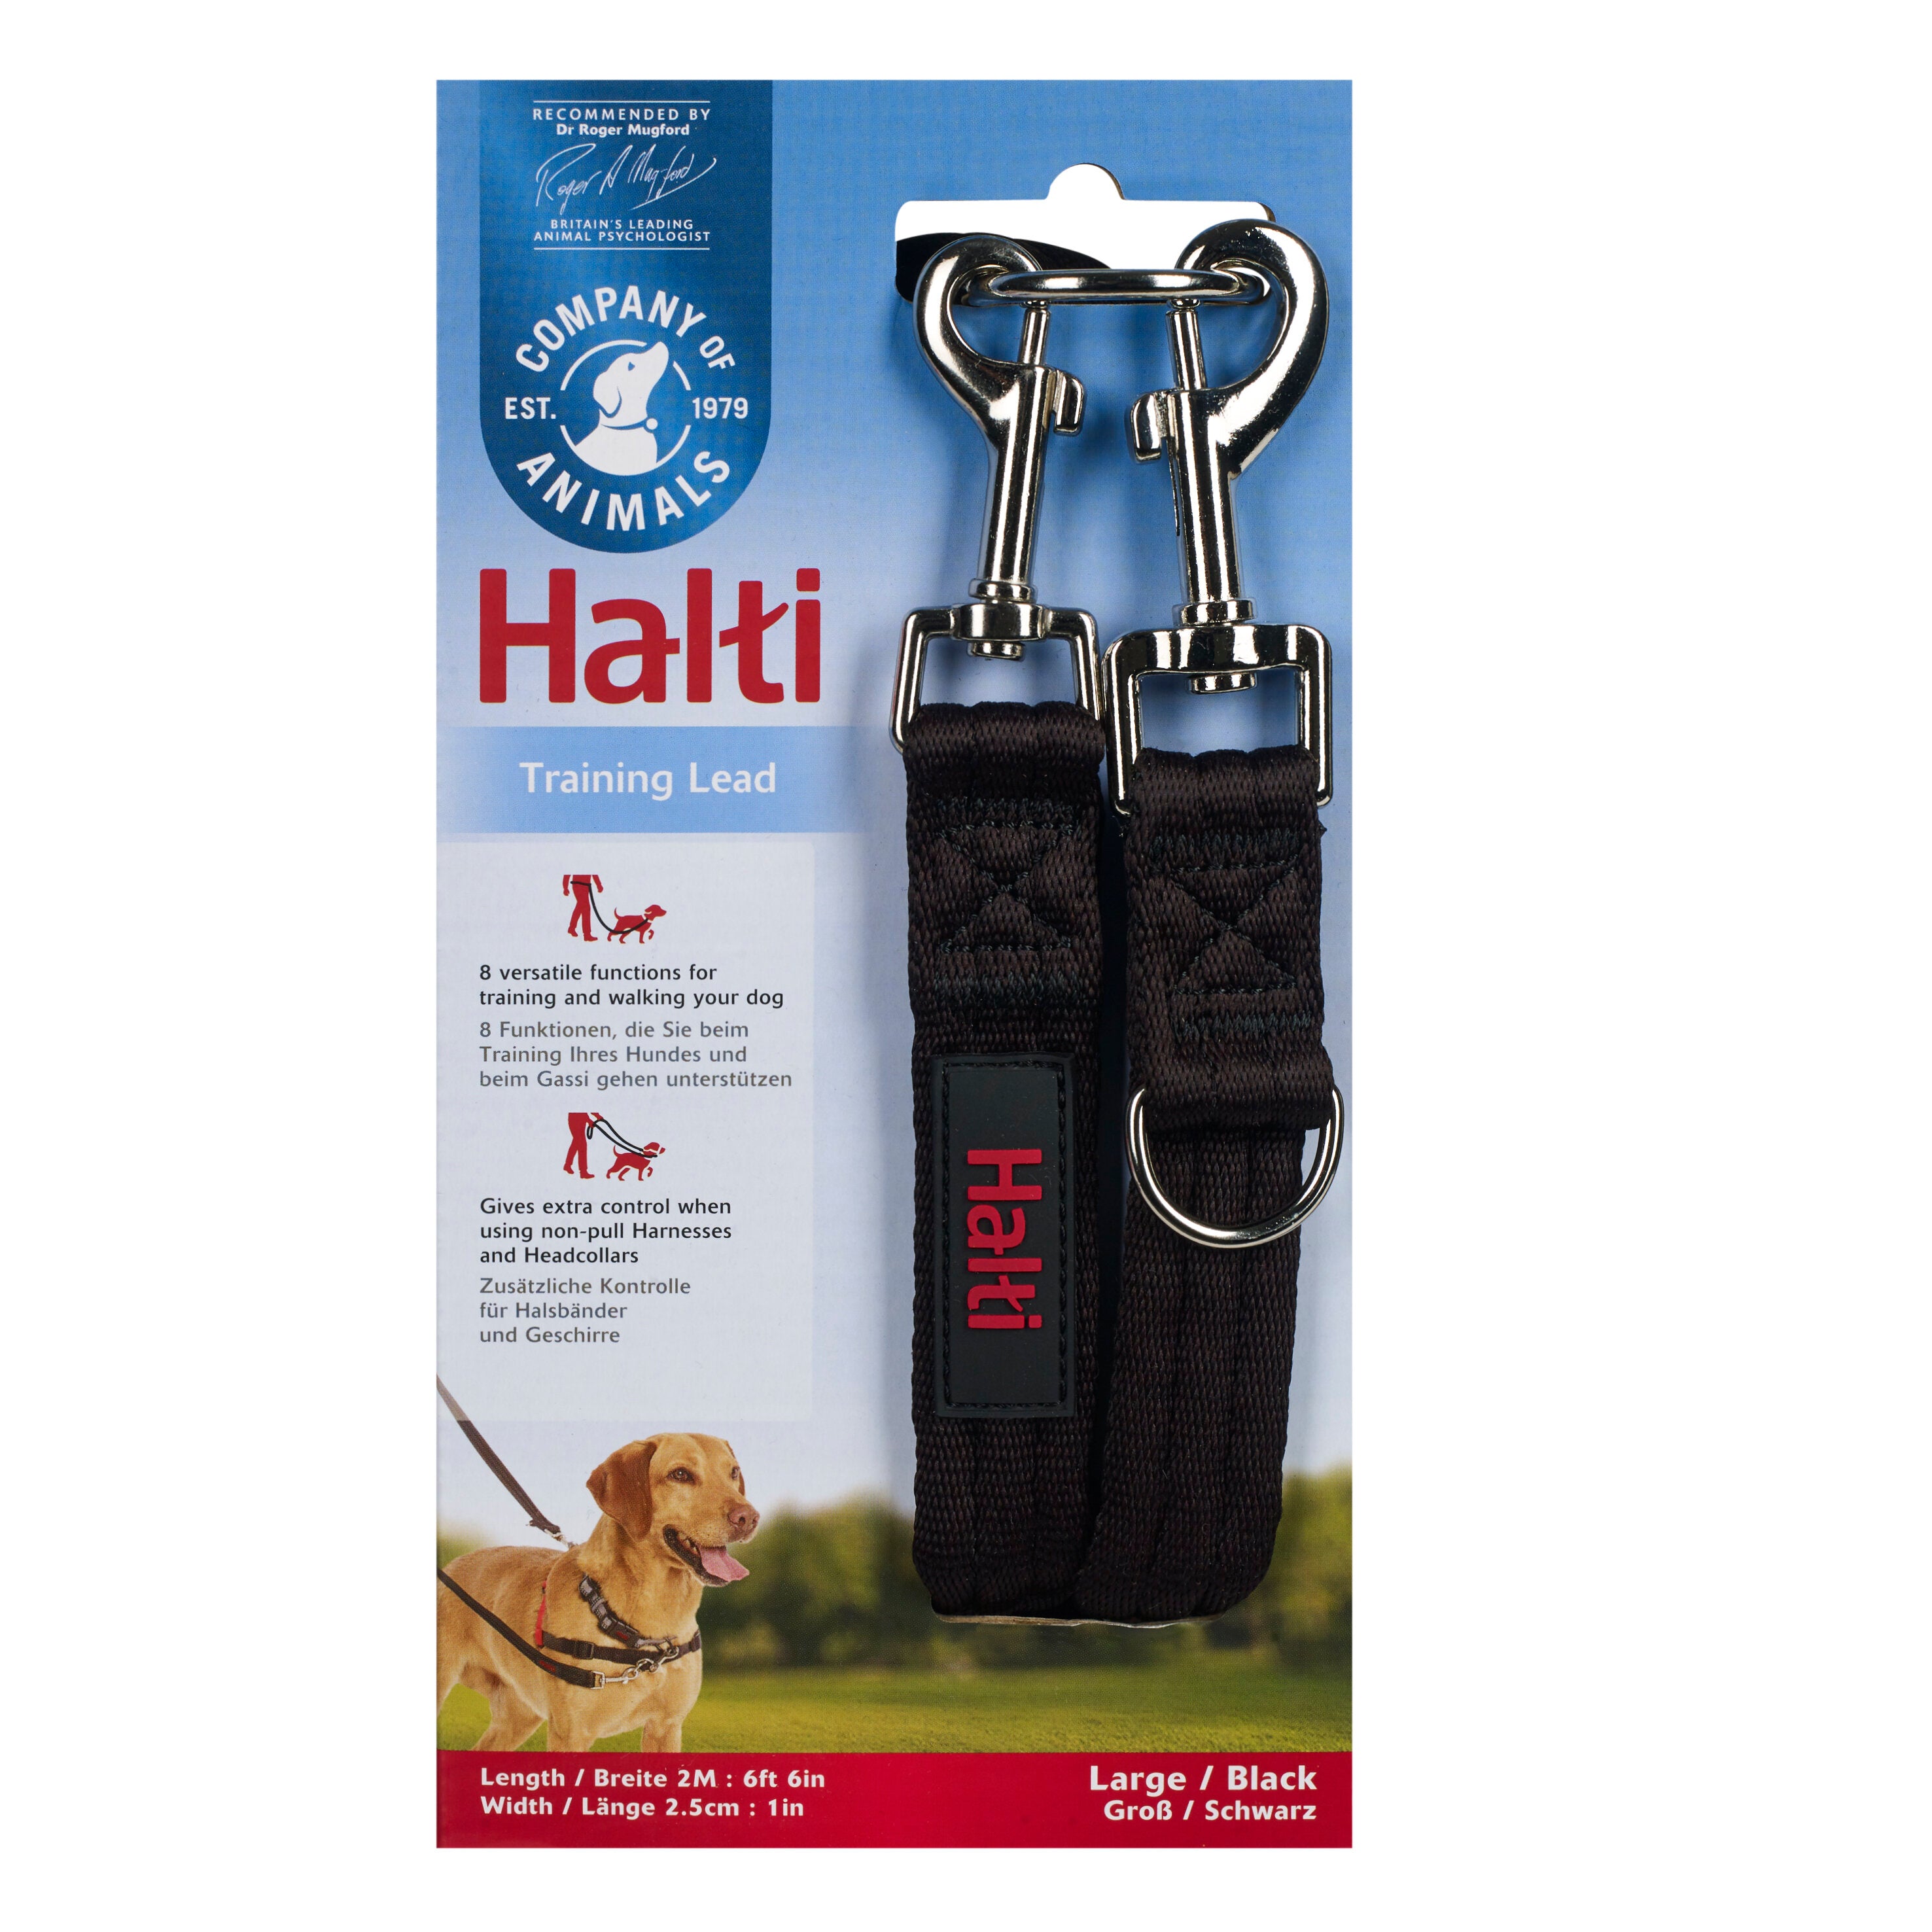 Halti black training lead - Guide Dogs recommended